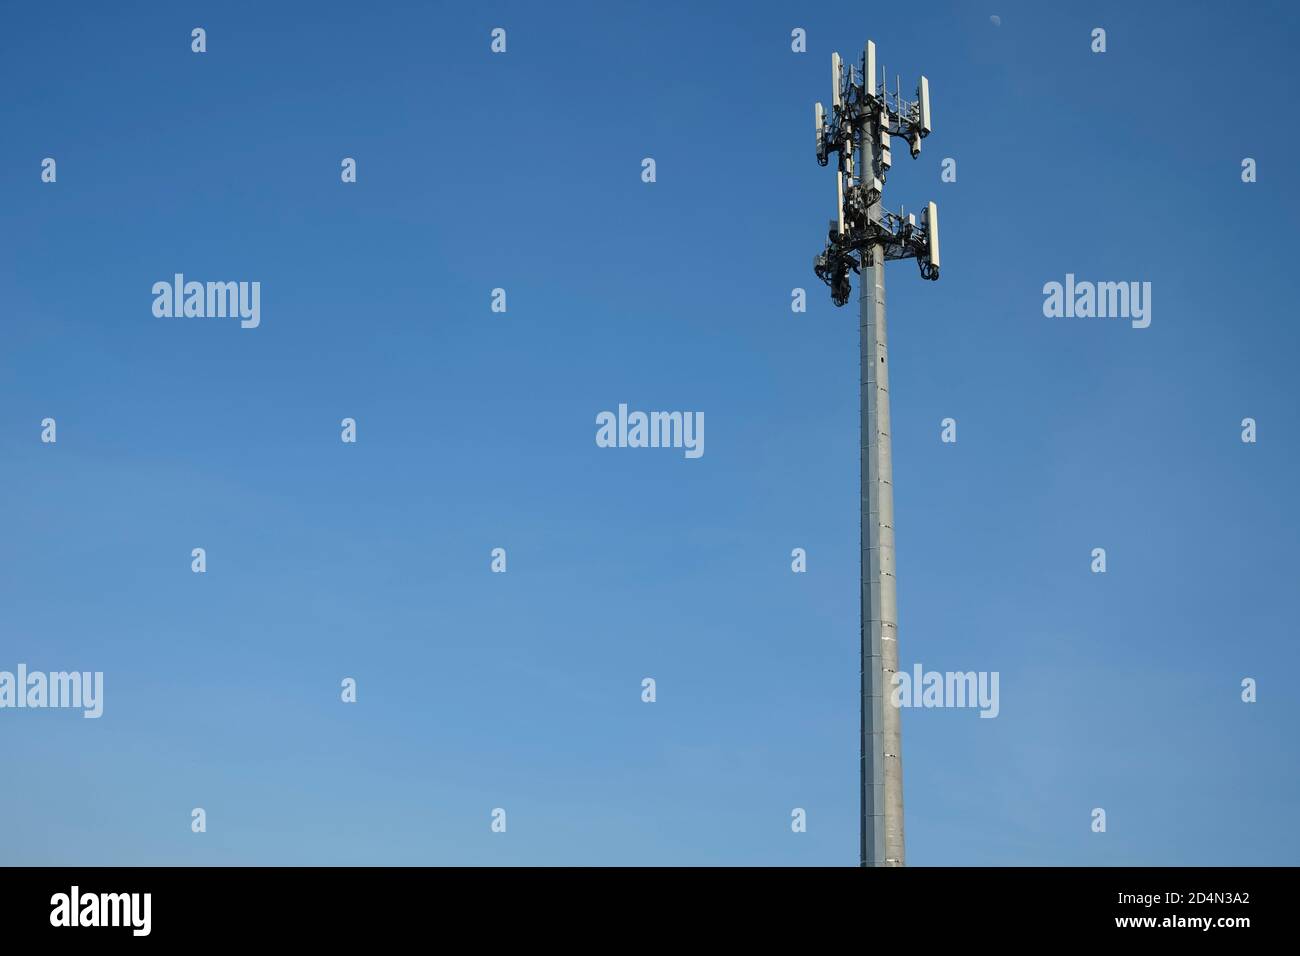 Mobile phone tower against blue sky Stock Photo